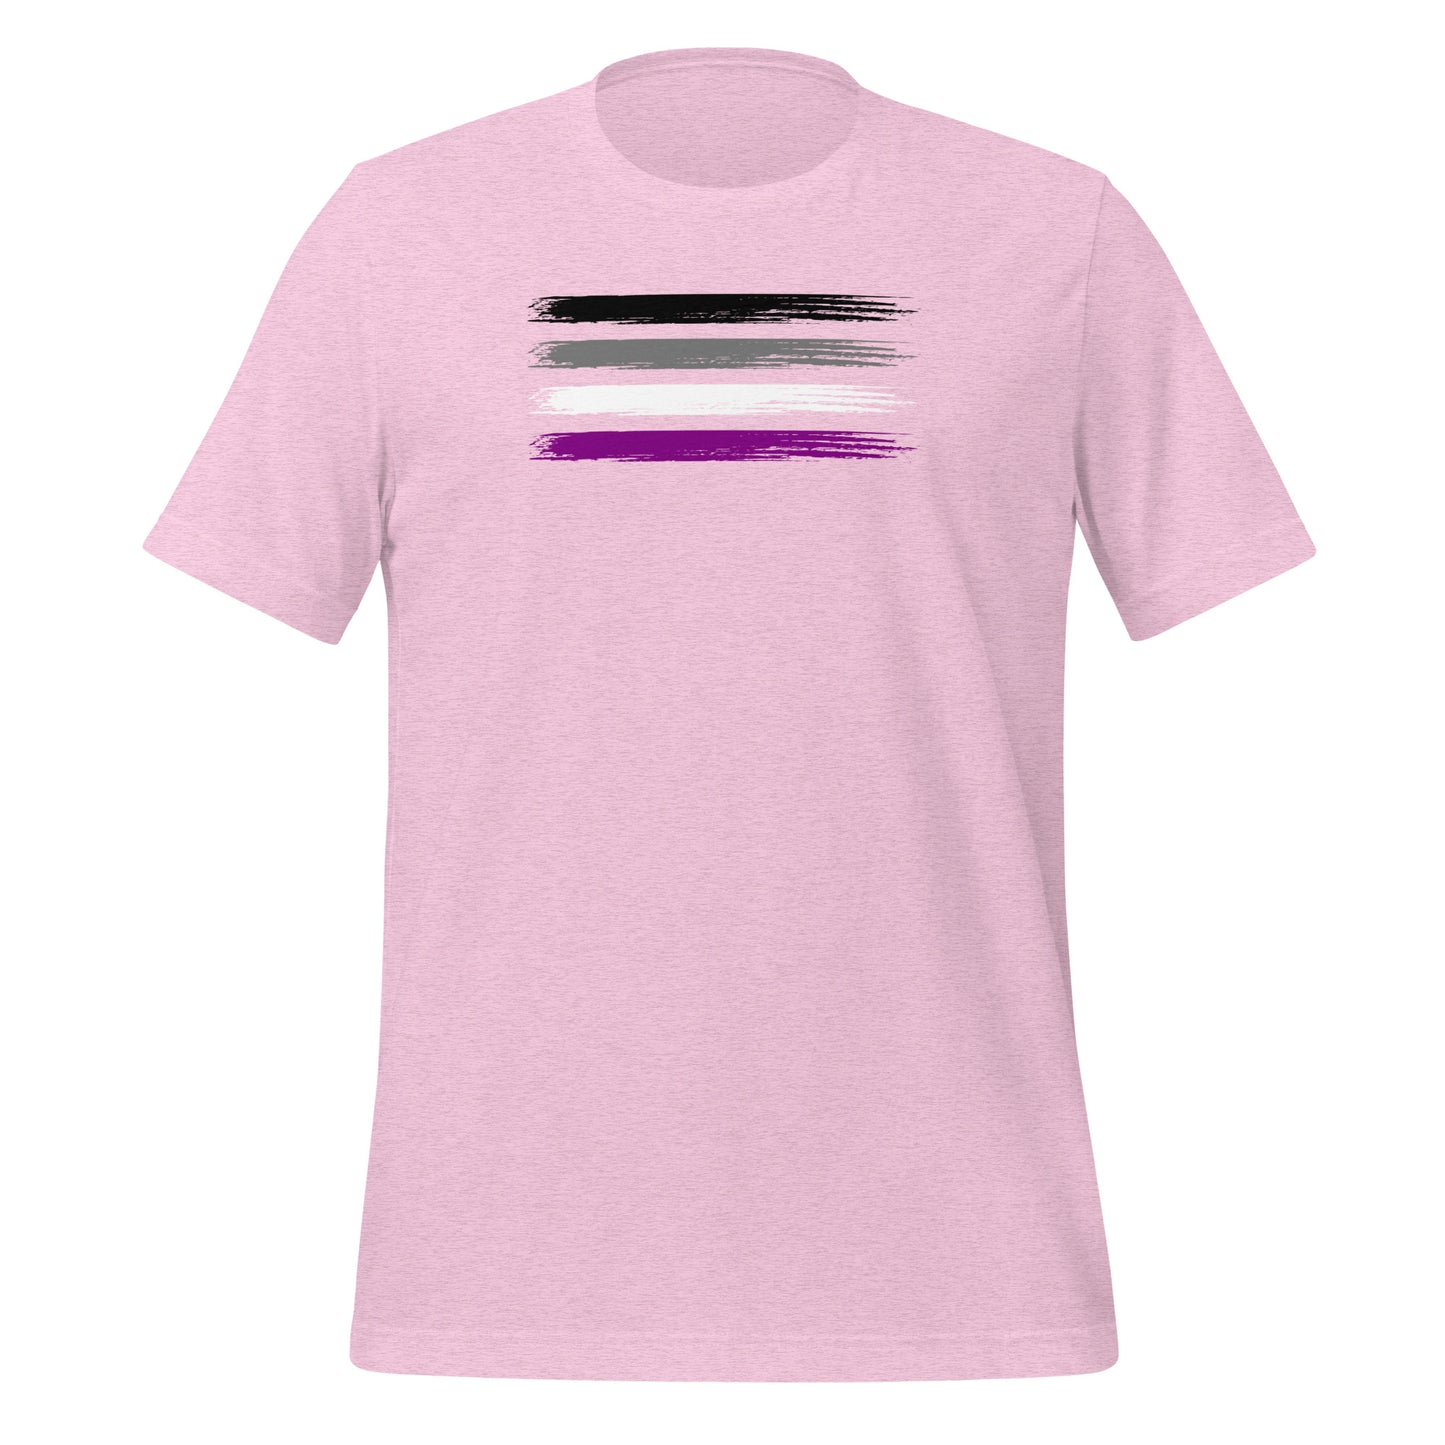 Asexual Pride Flag unisex t-shirt